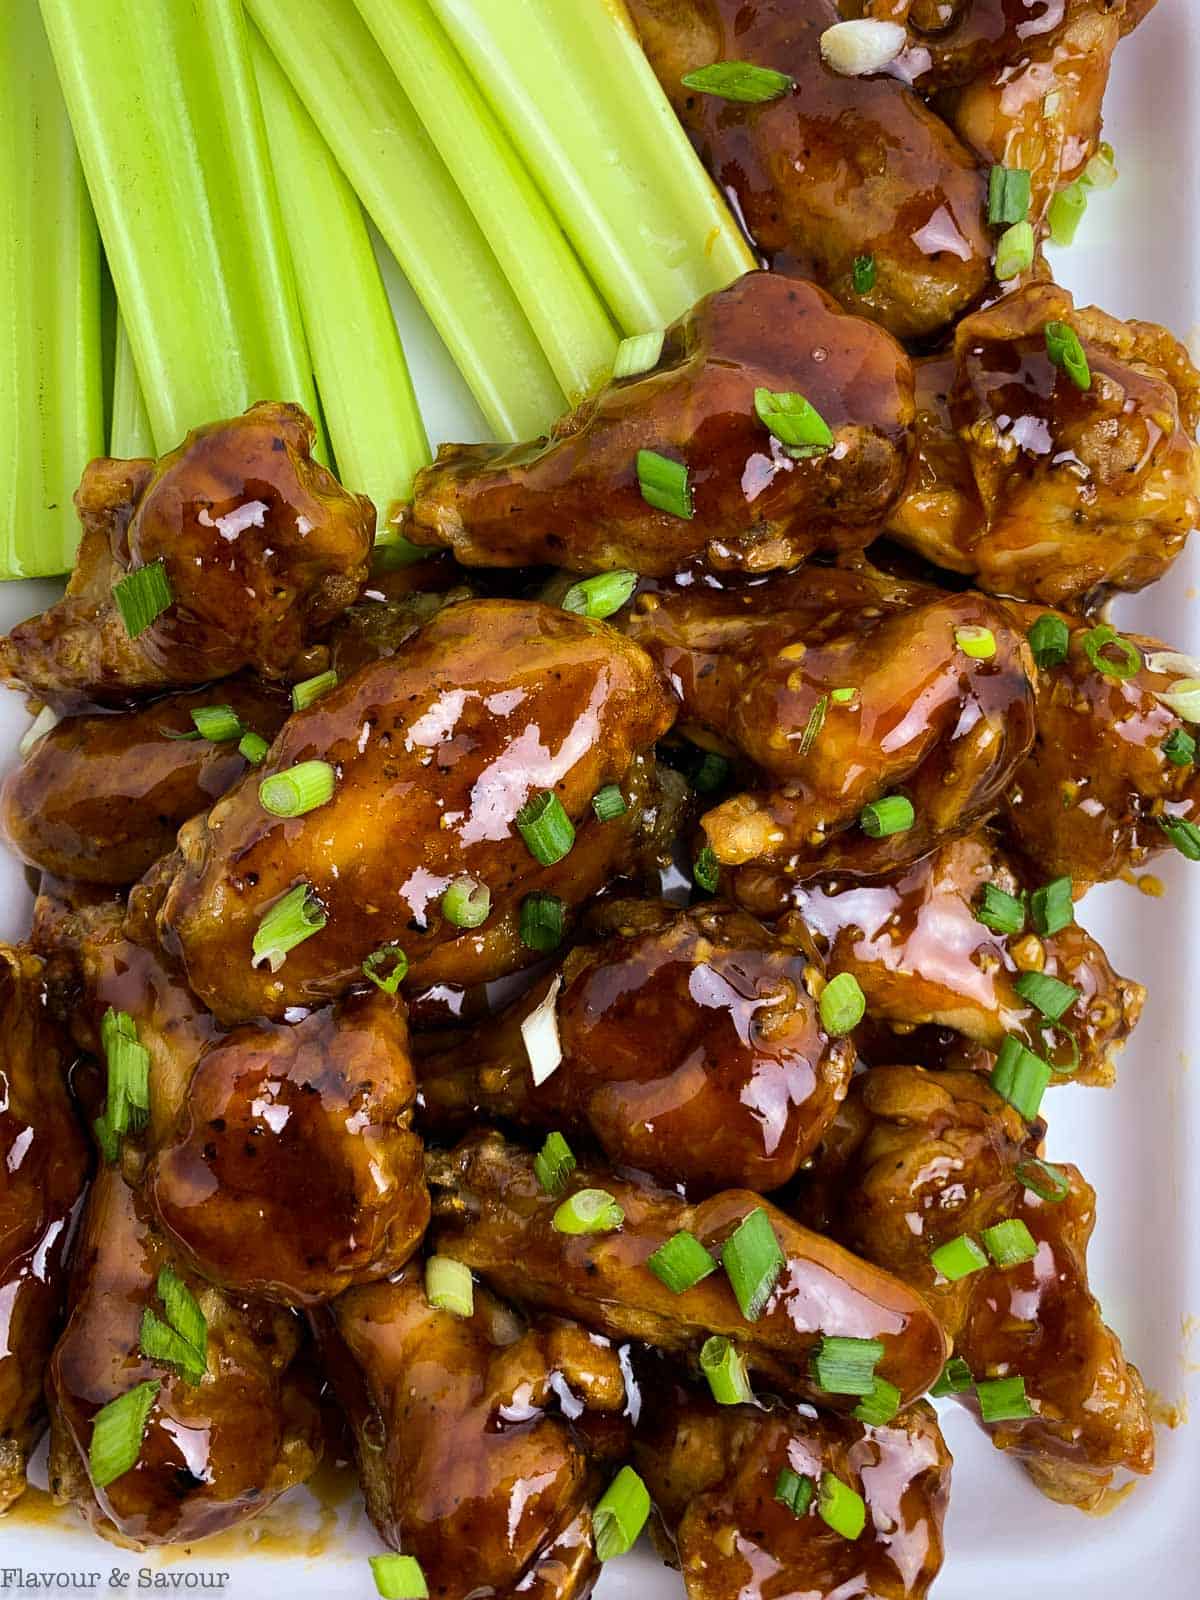 A platter of air fryer honey garlic chicken wings with celery sticks. Ideal for game day snacks.